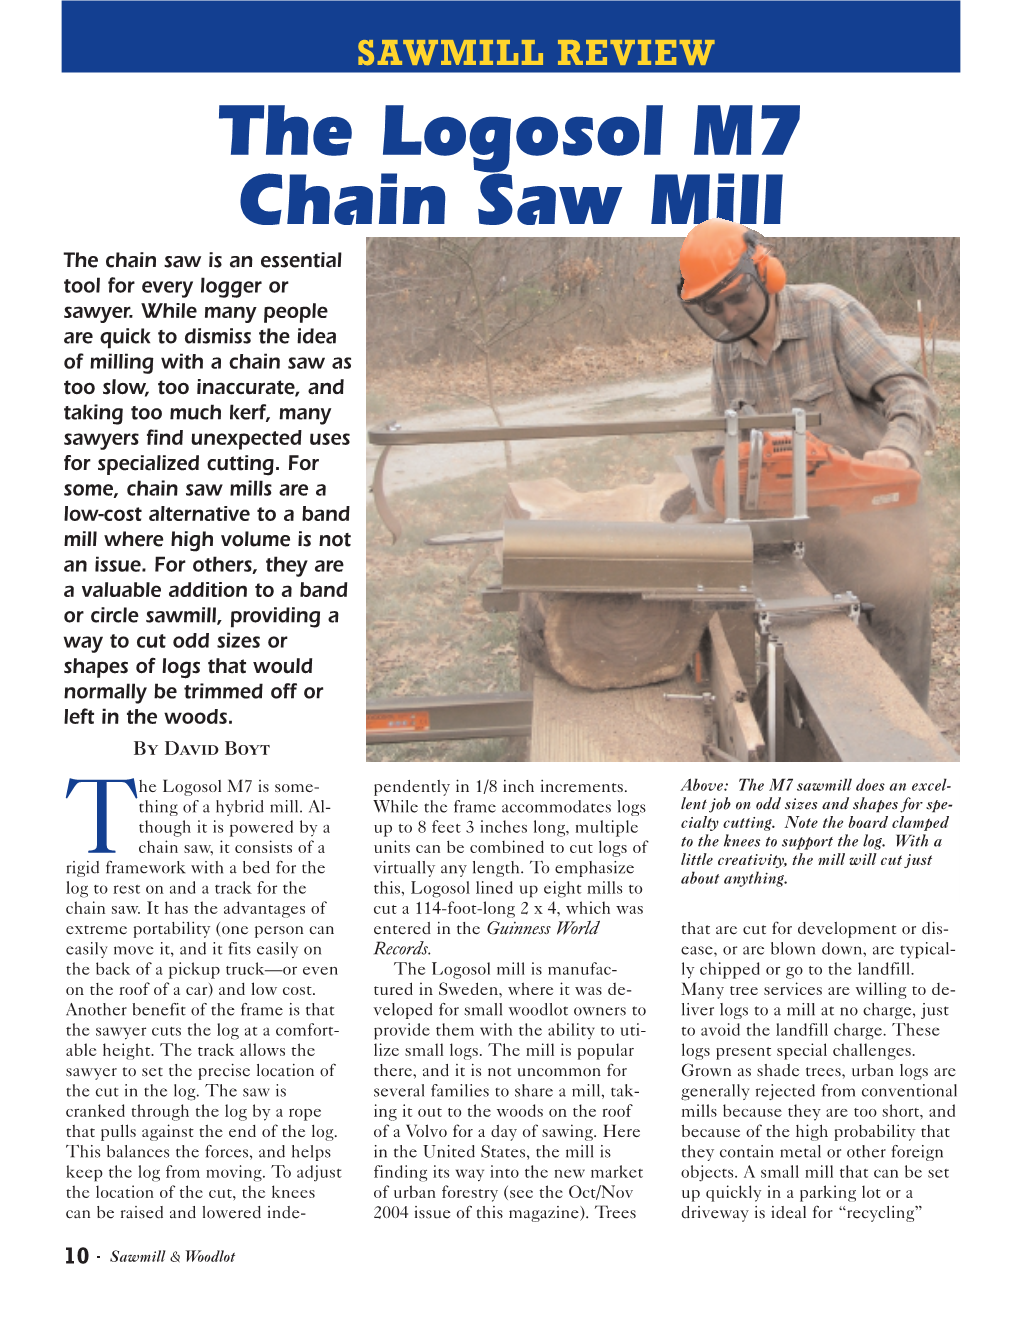 The Logosol M7 Chain Saw Mill the Chain Saw Is an Essential Tool for Every Logger Or Sawyer